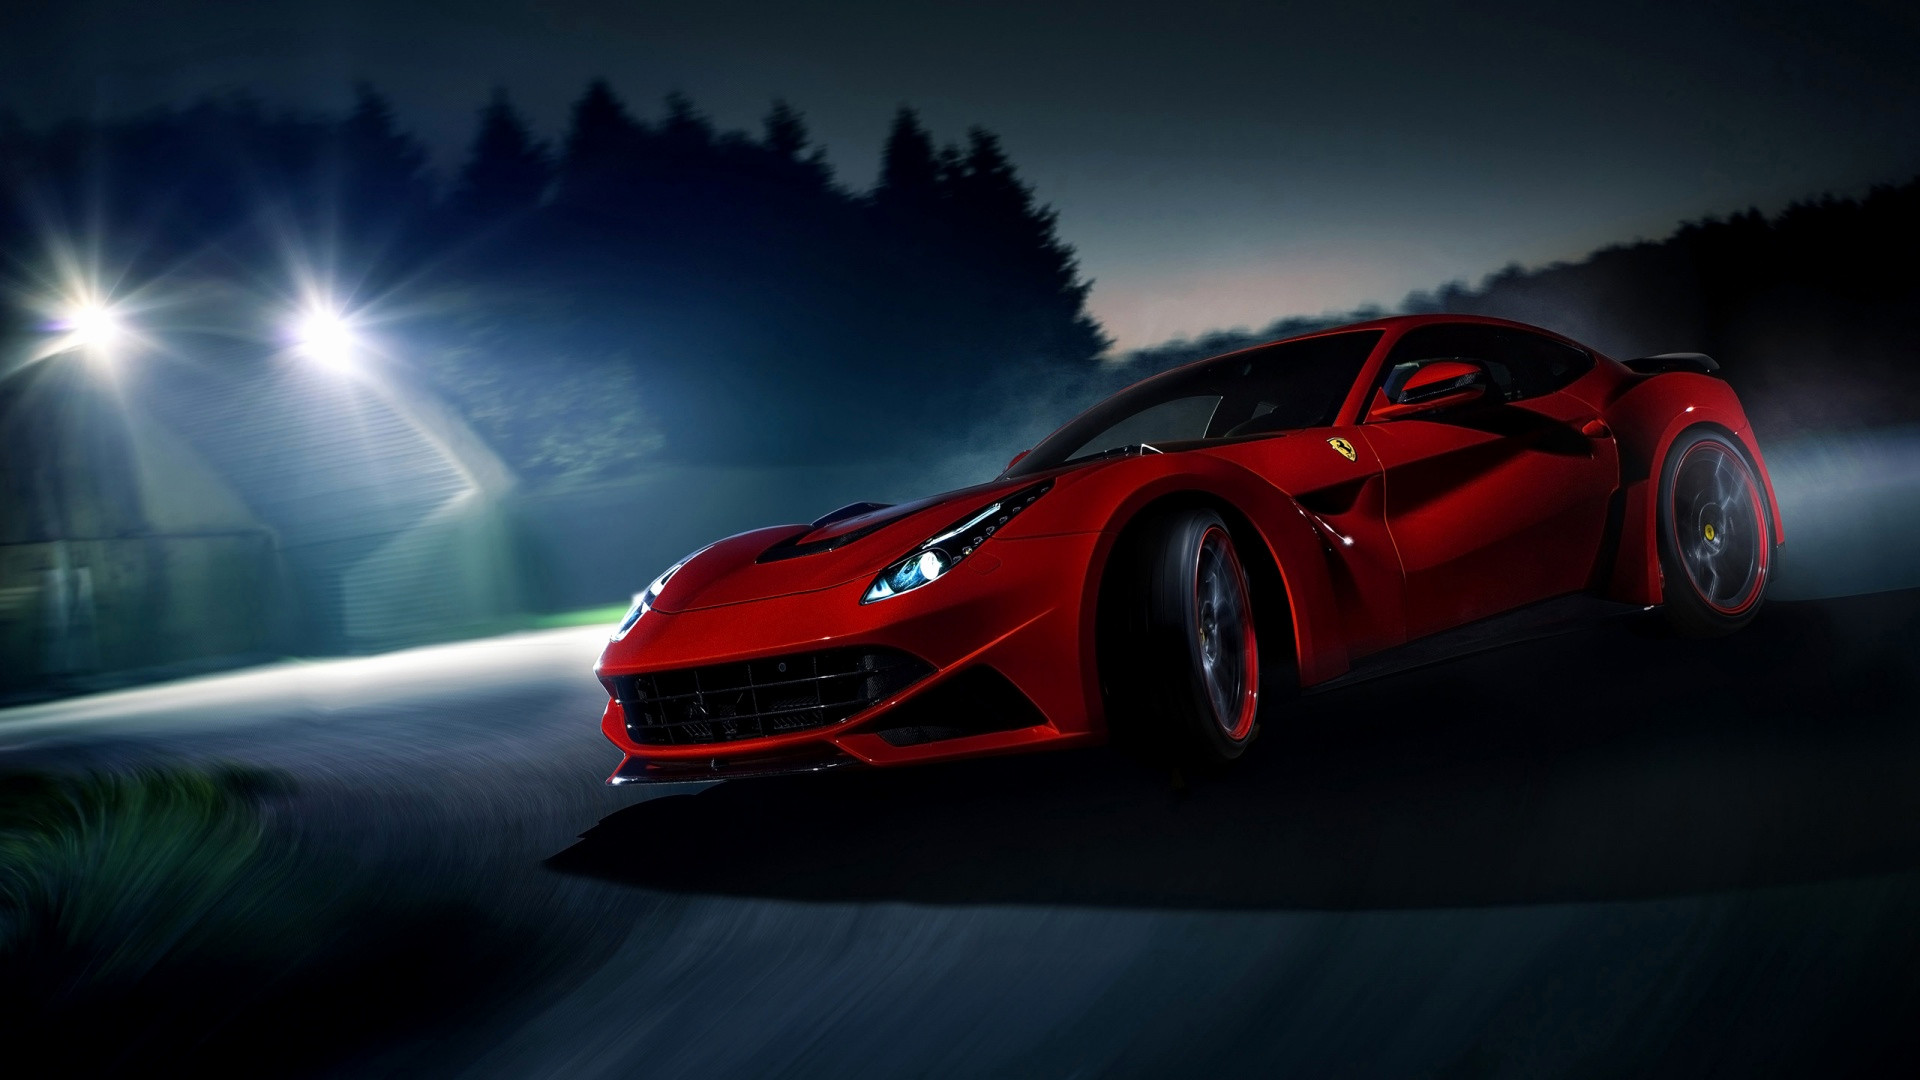 1920x1080 Awesome Car Wallpapers New Cool Car Background 1600—1000 Awesome Car  Backgrounds 60